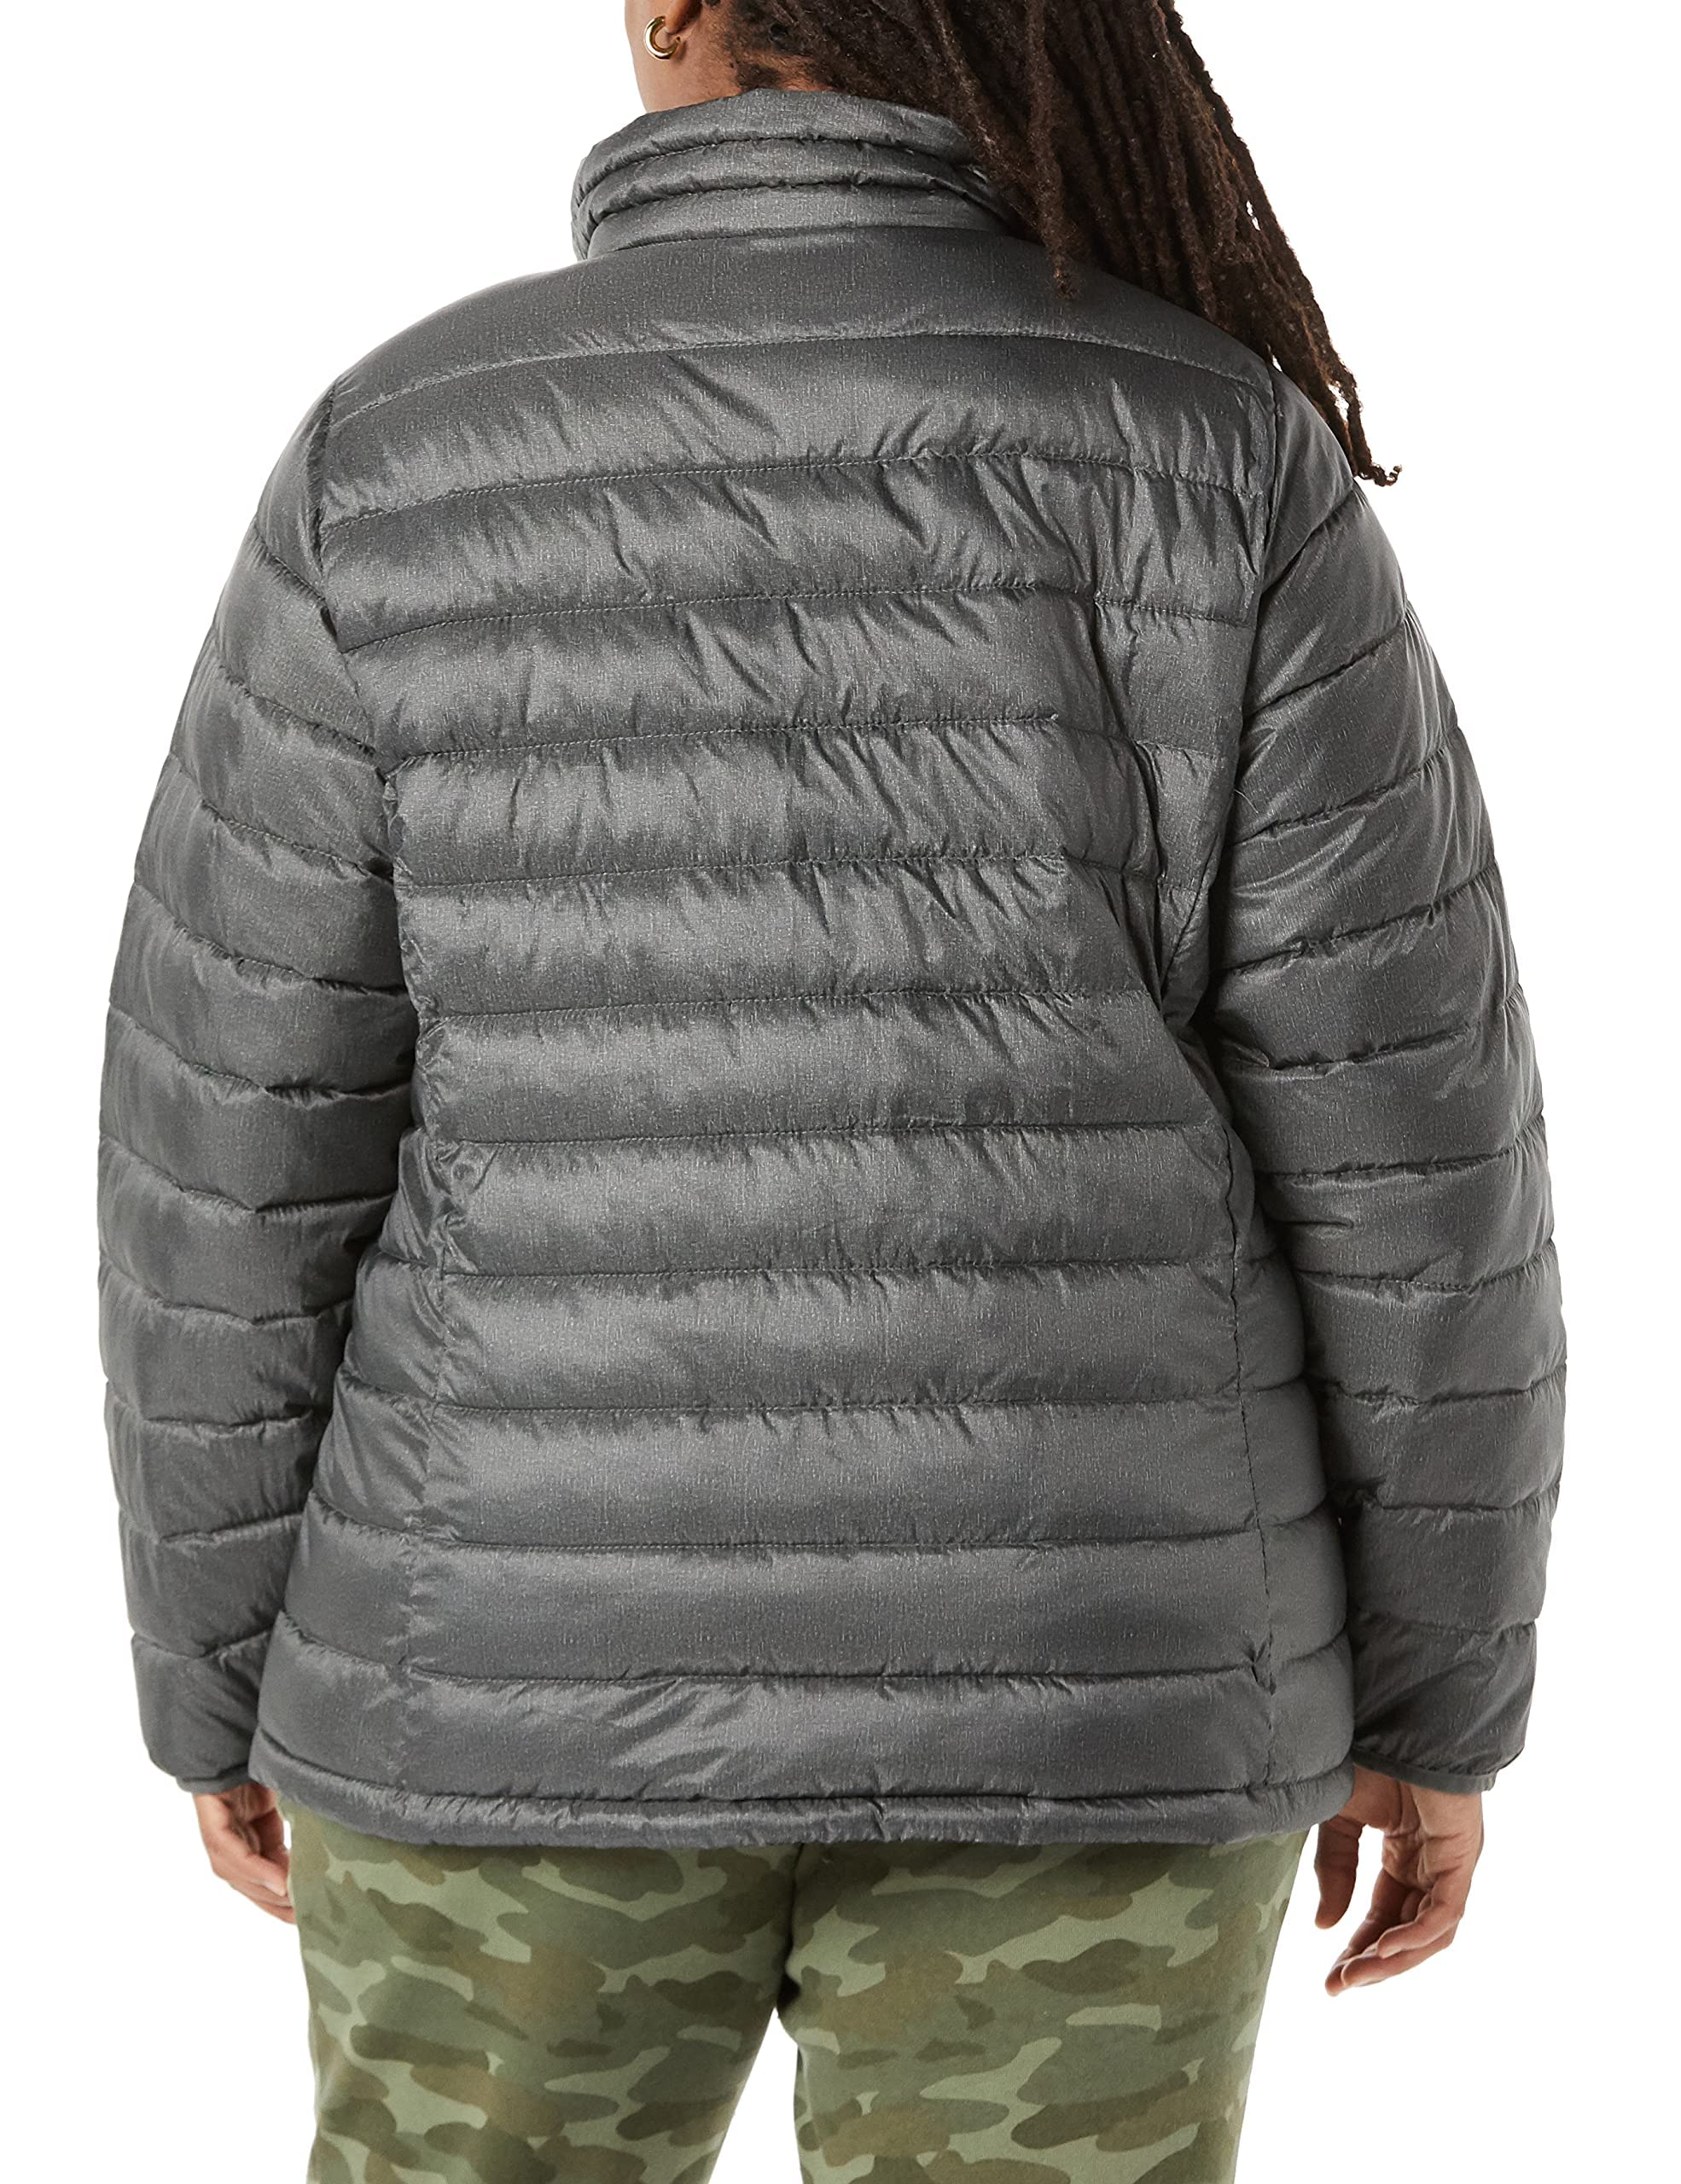 Amazon Essentials Women's Lightweight Long-Sleeve Water-Resistant Puffer Jacket (Available in Plus Size)